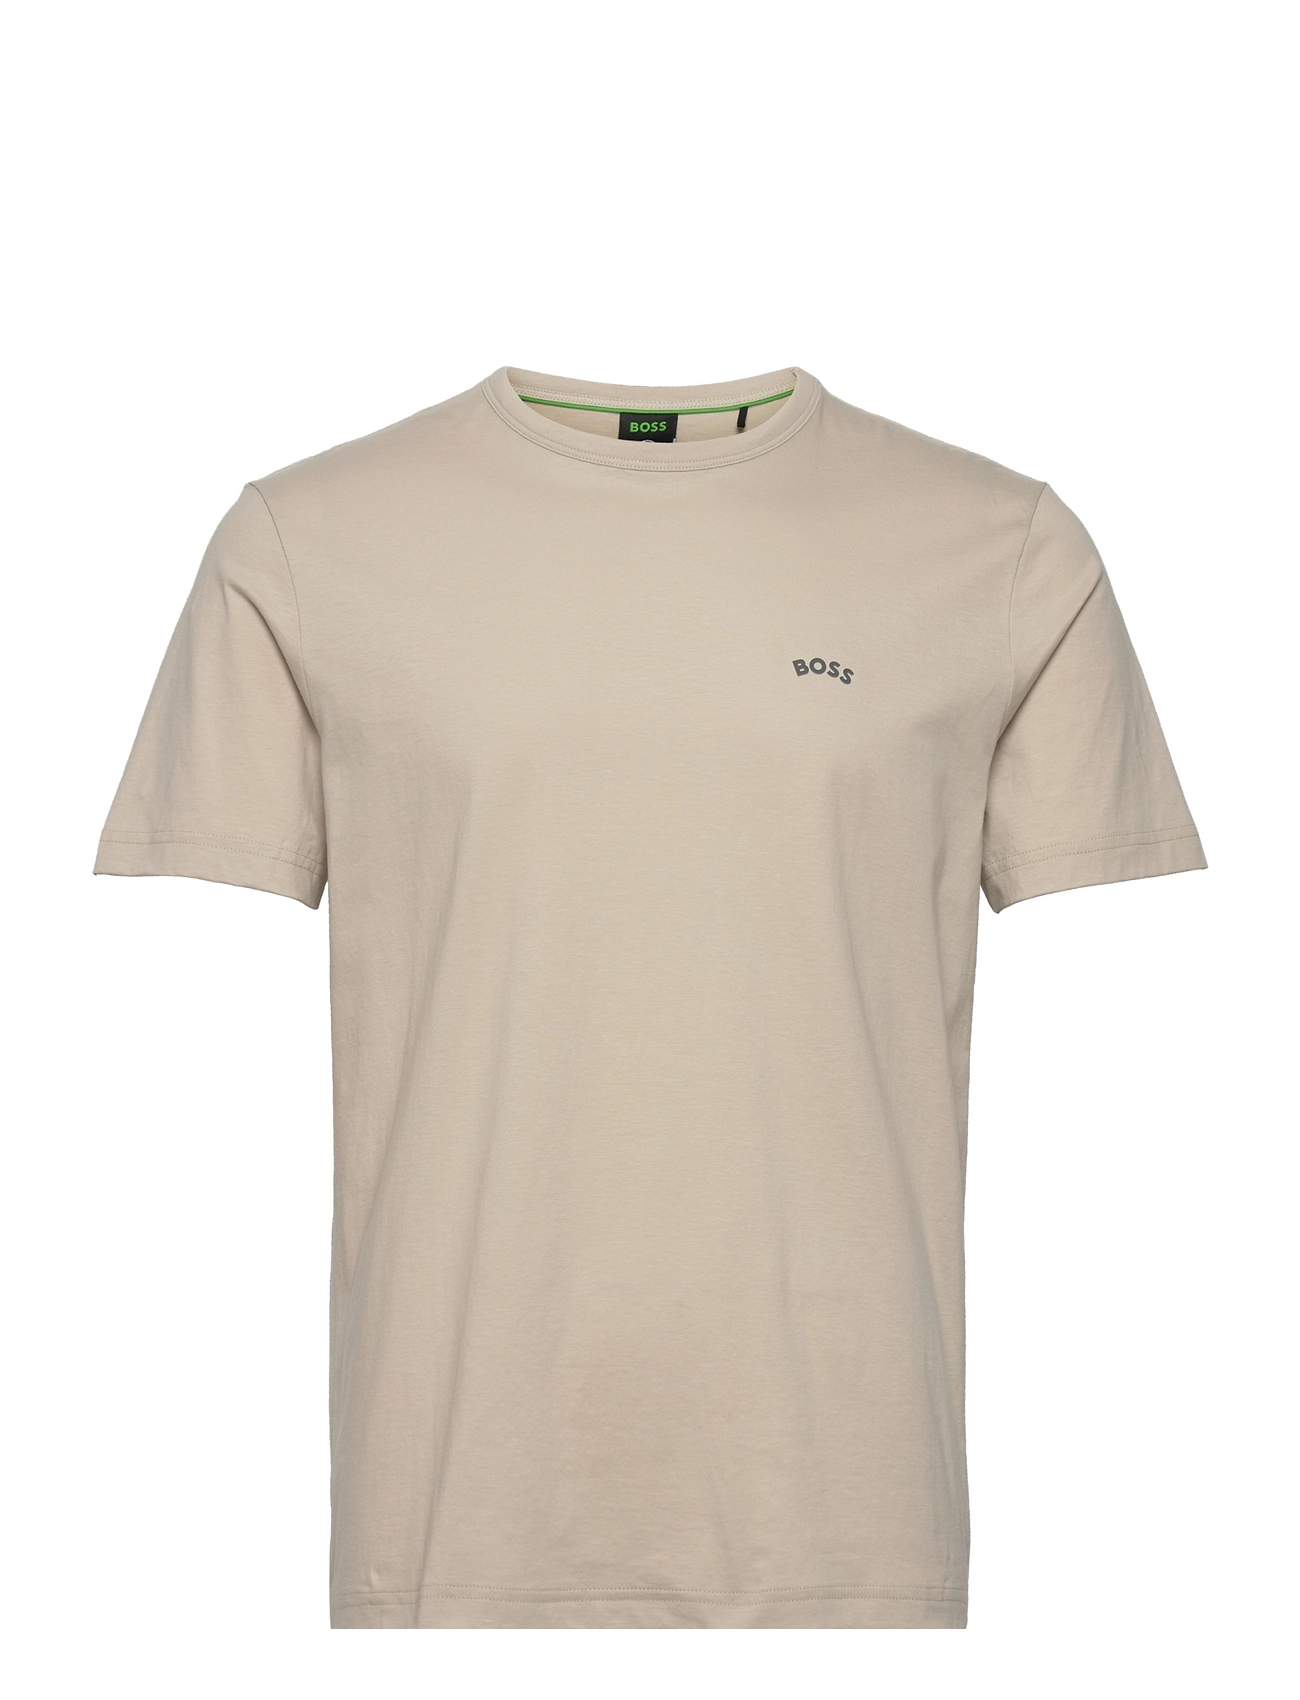 Tee Curved T-shirts Short-sleeved Beige BOSS